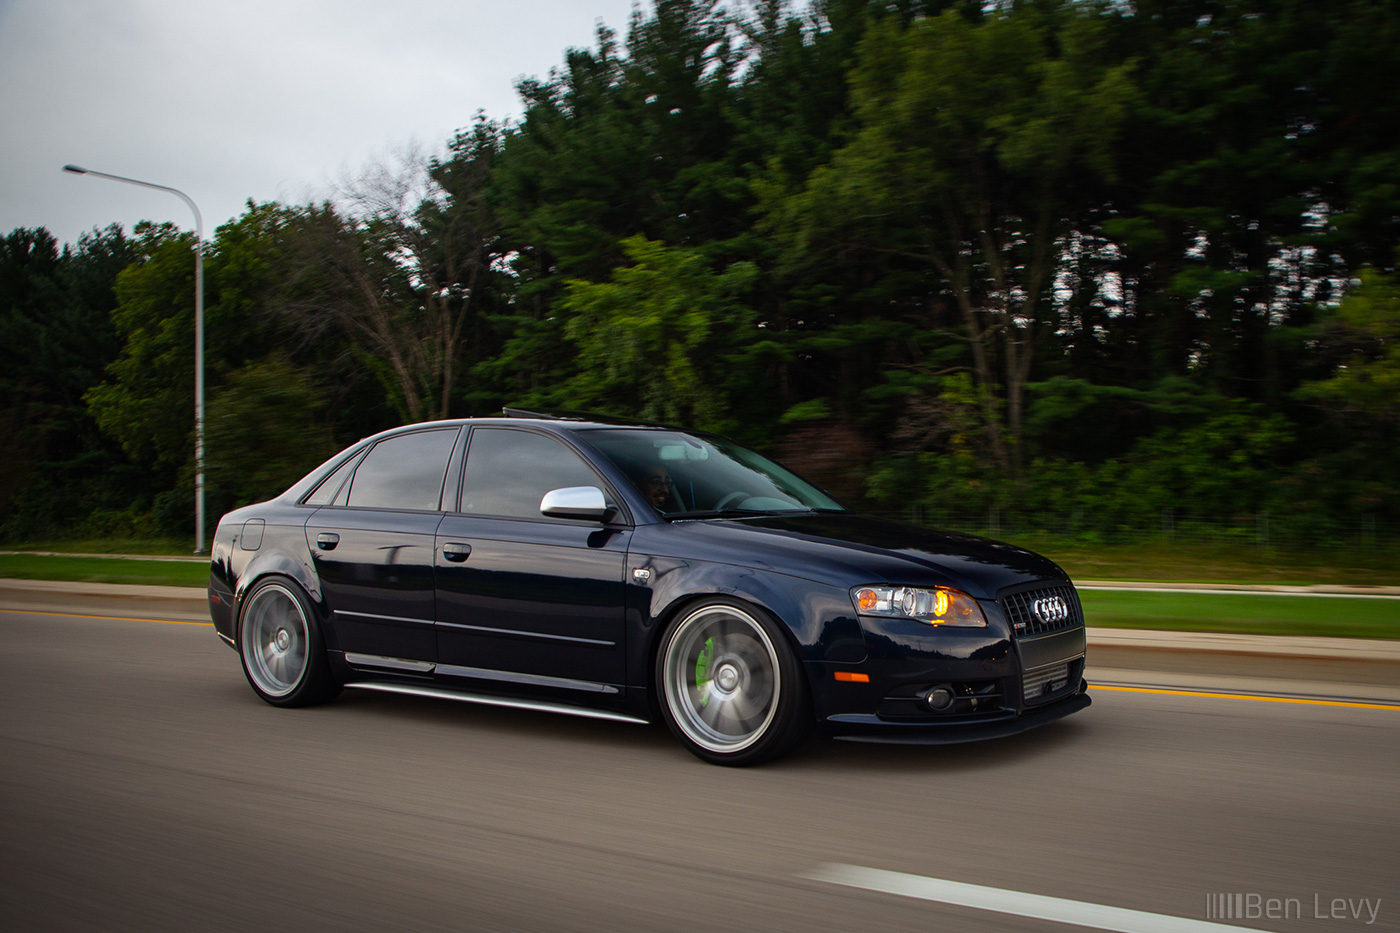 Rolling Shot of a Blue Audi A4 in Illinois